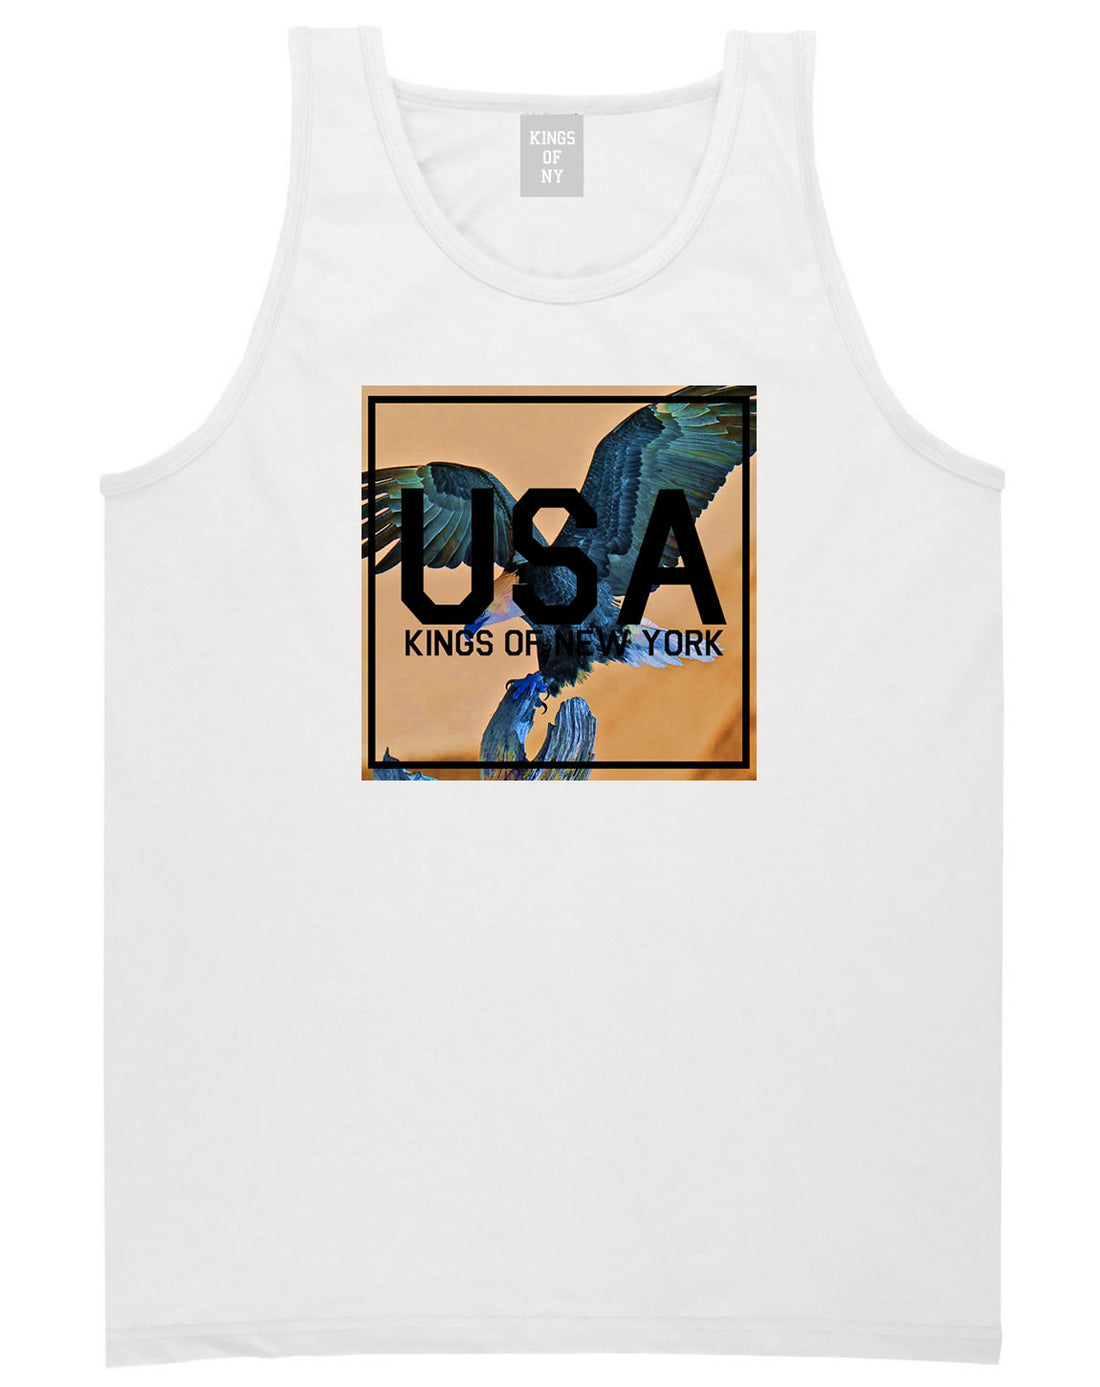 USA Bald Eagle America Tank Top in White By Kings Of NY